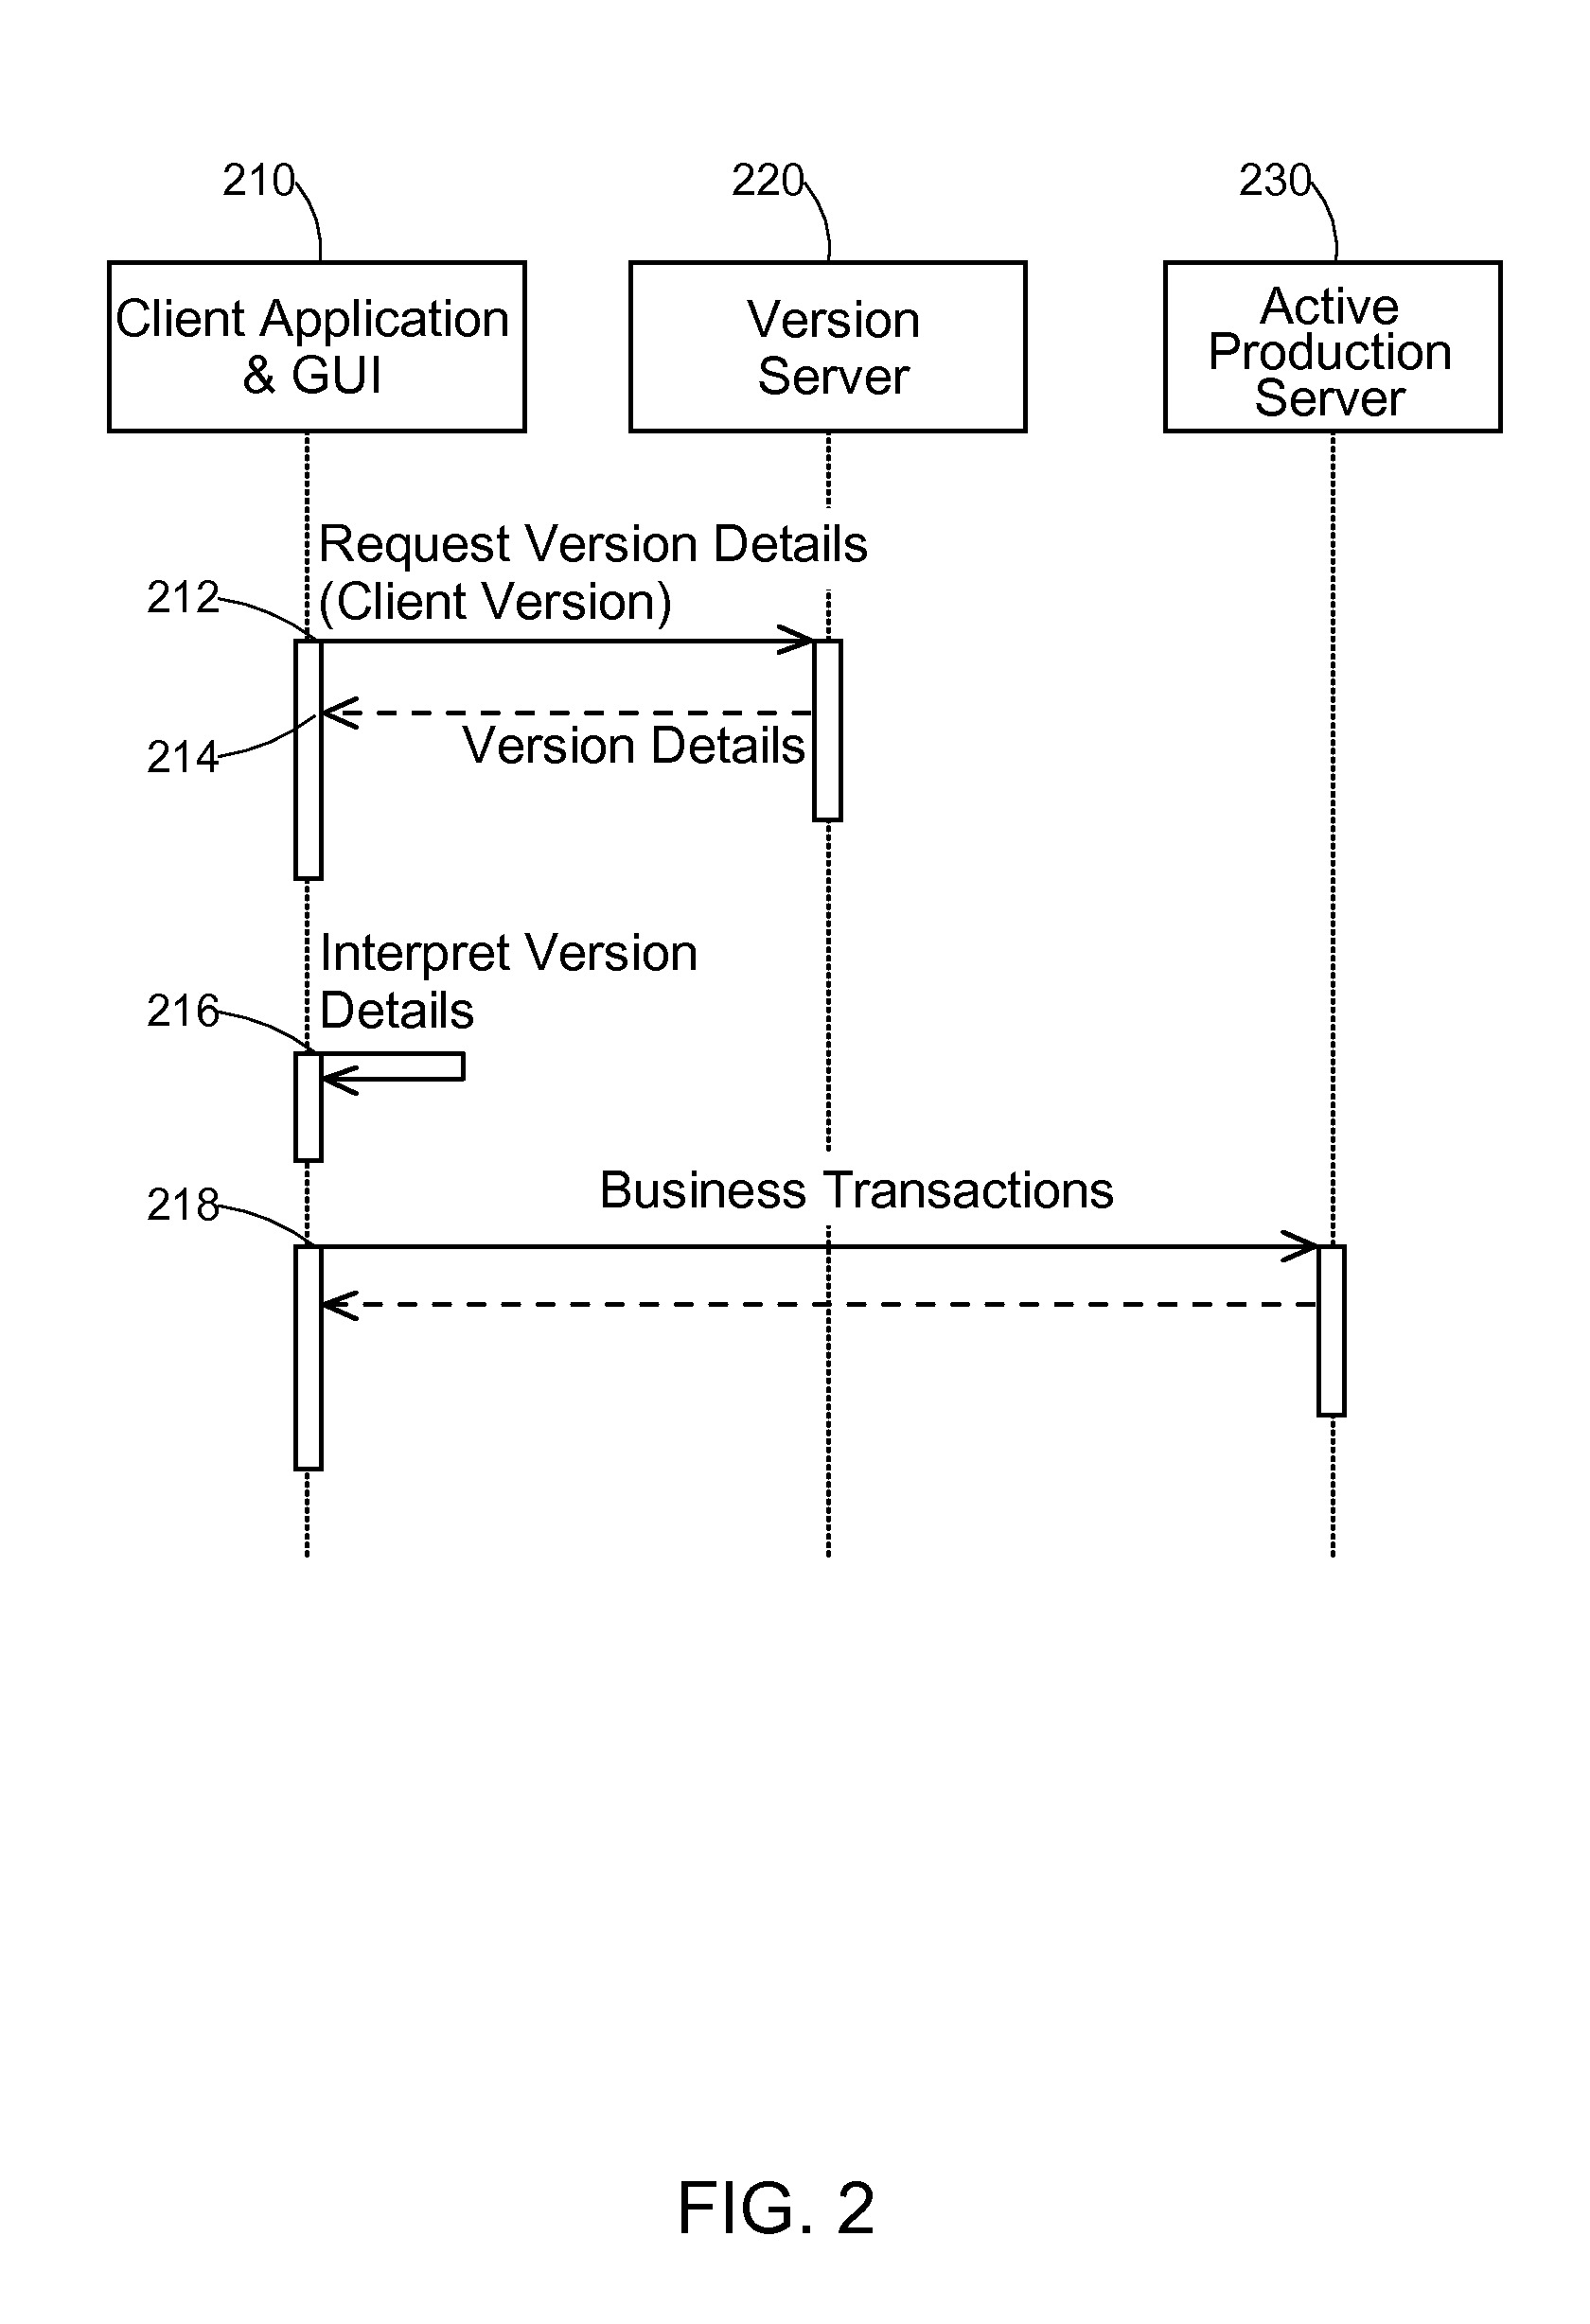 Method and system for deploying non-backward compatible server versions in a client/server computing environment